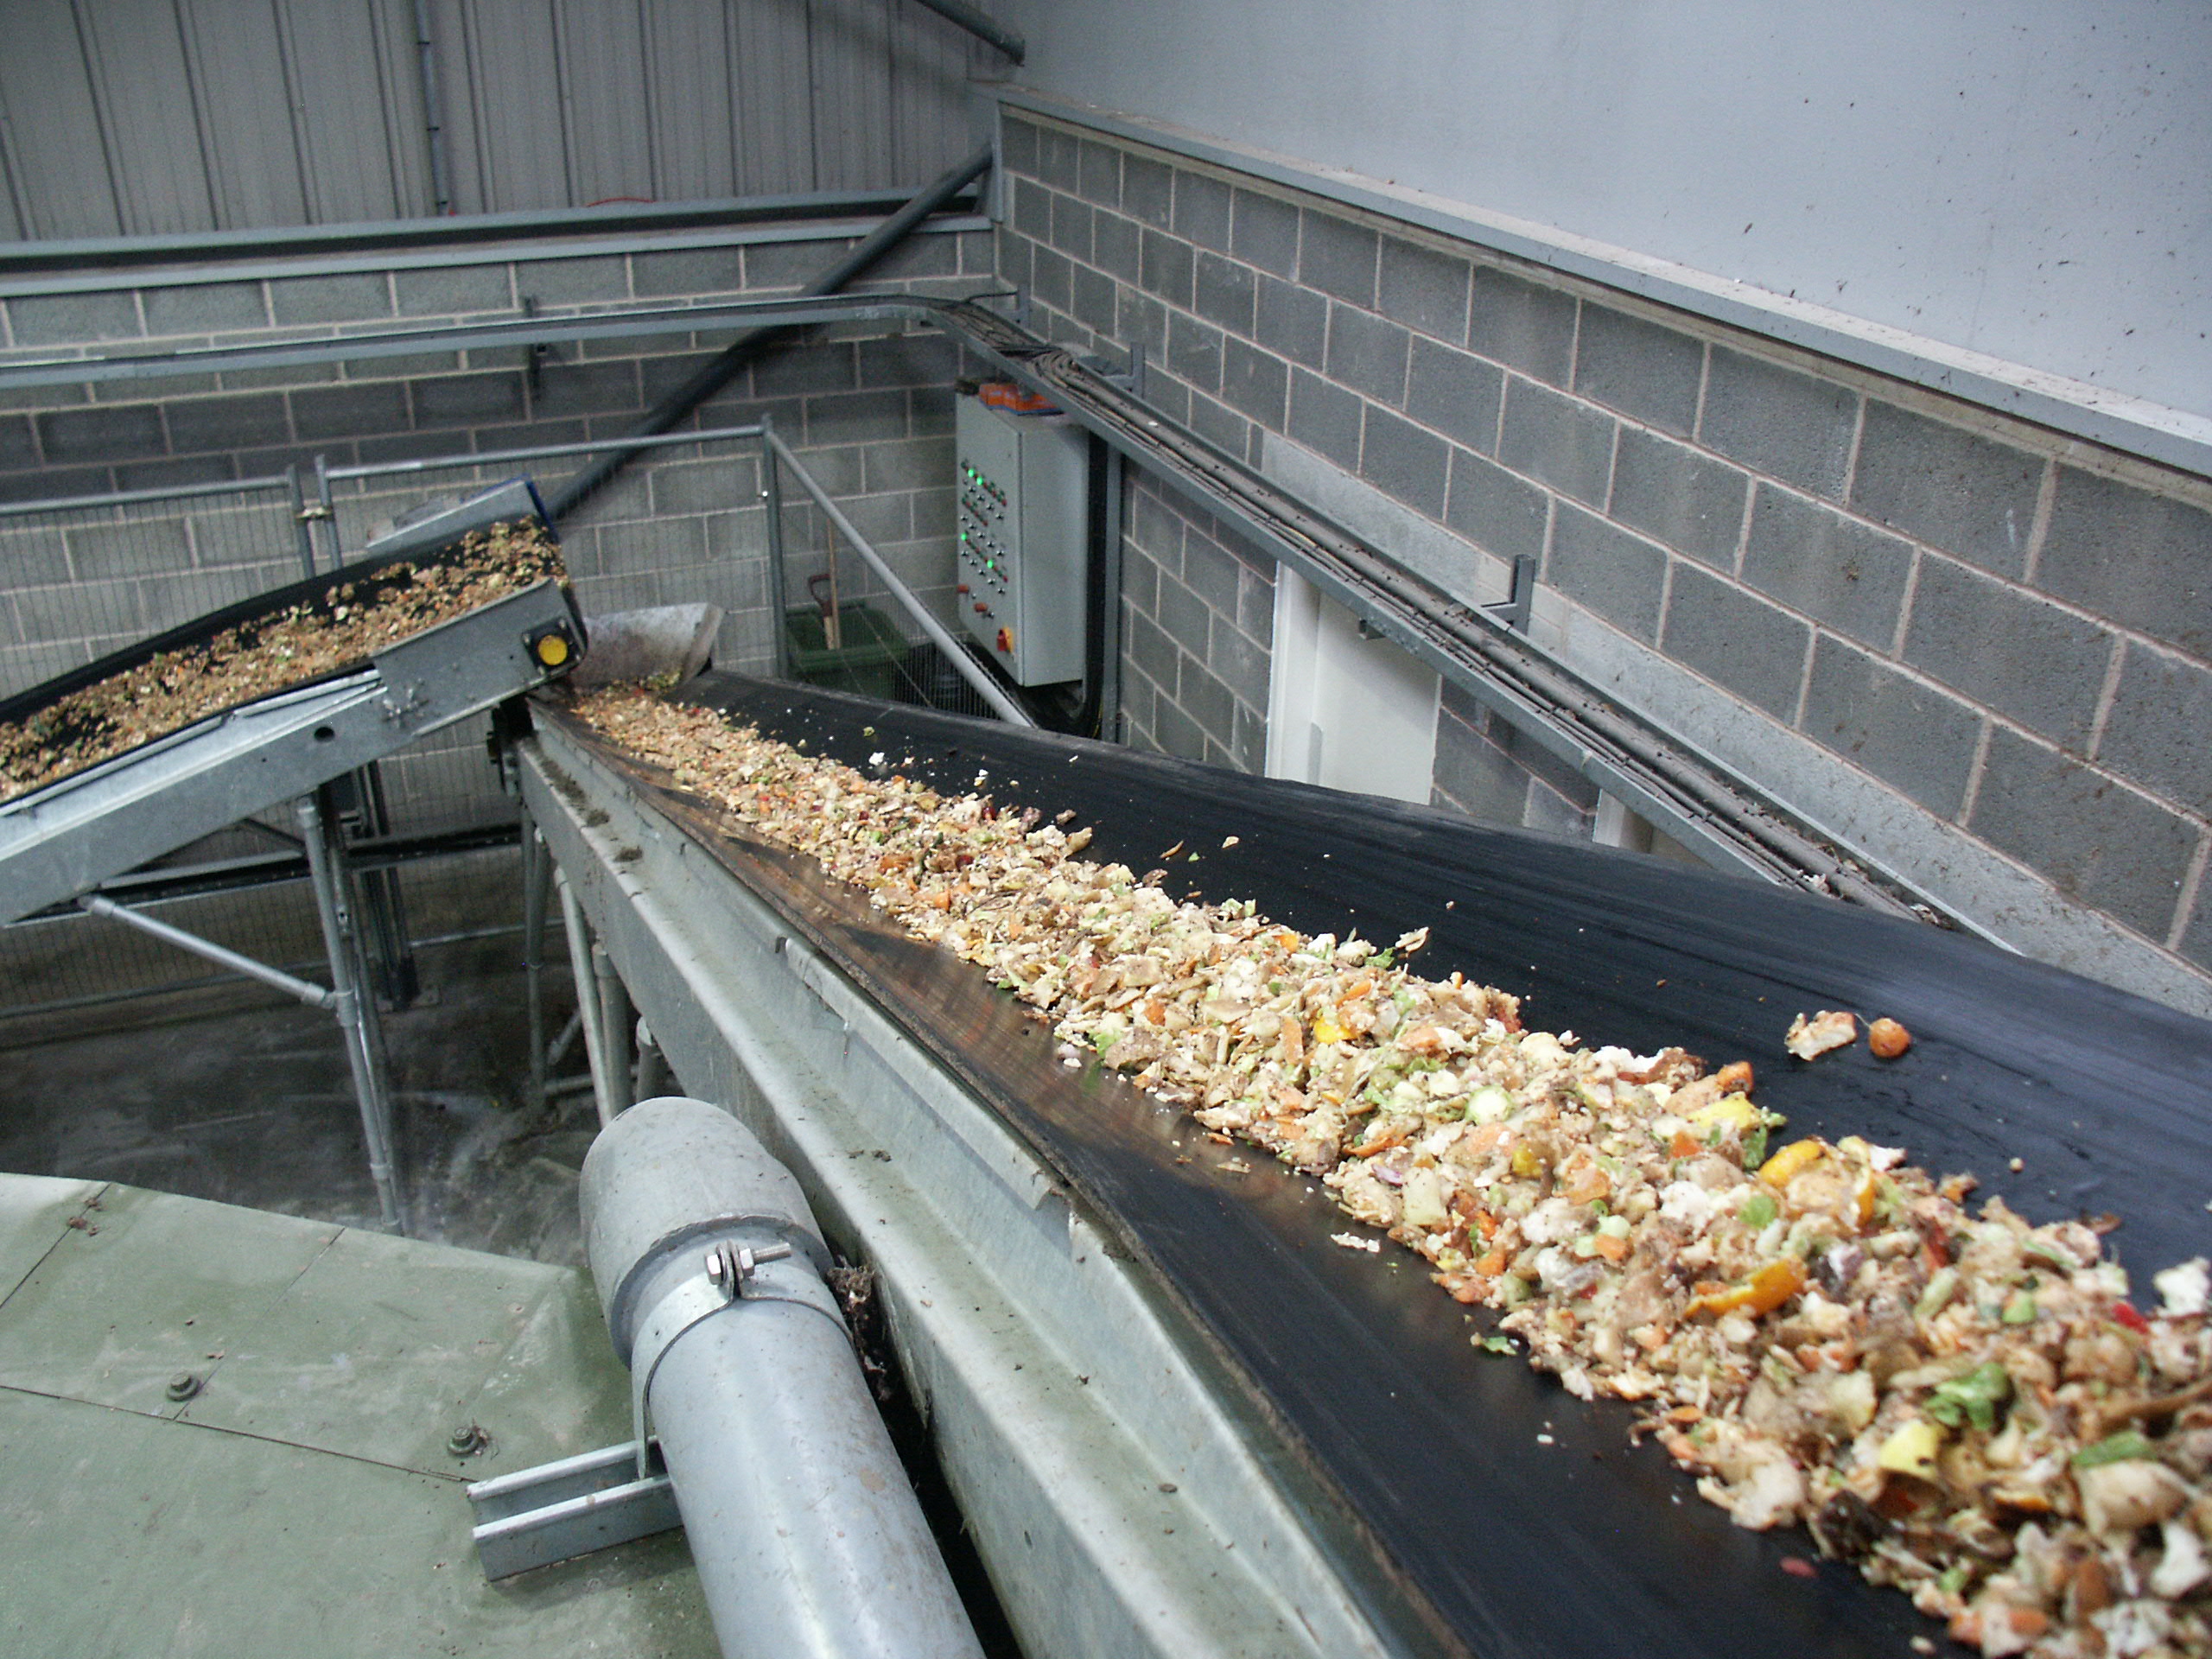 food waste recycling